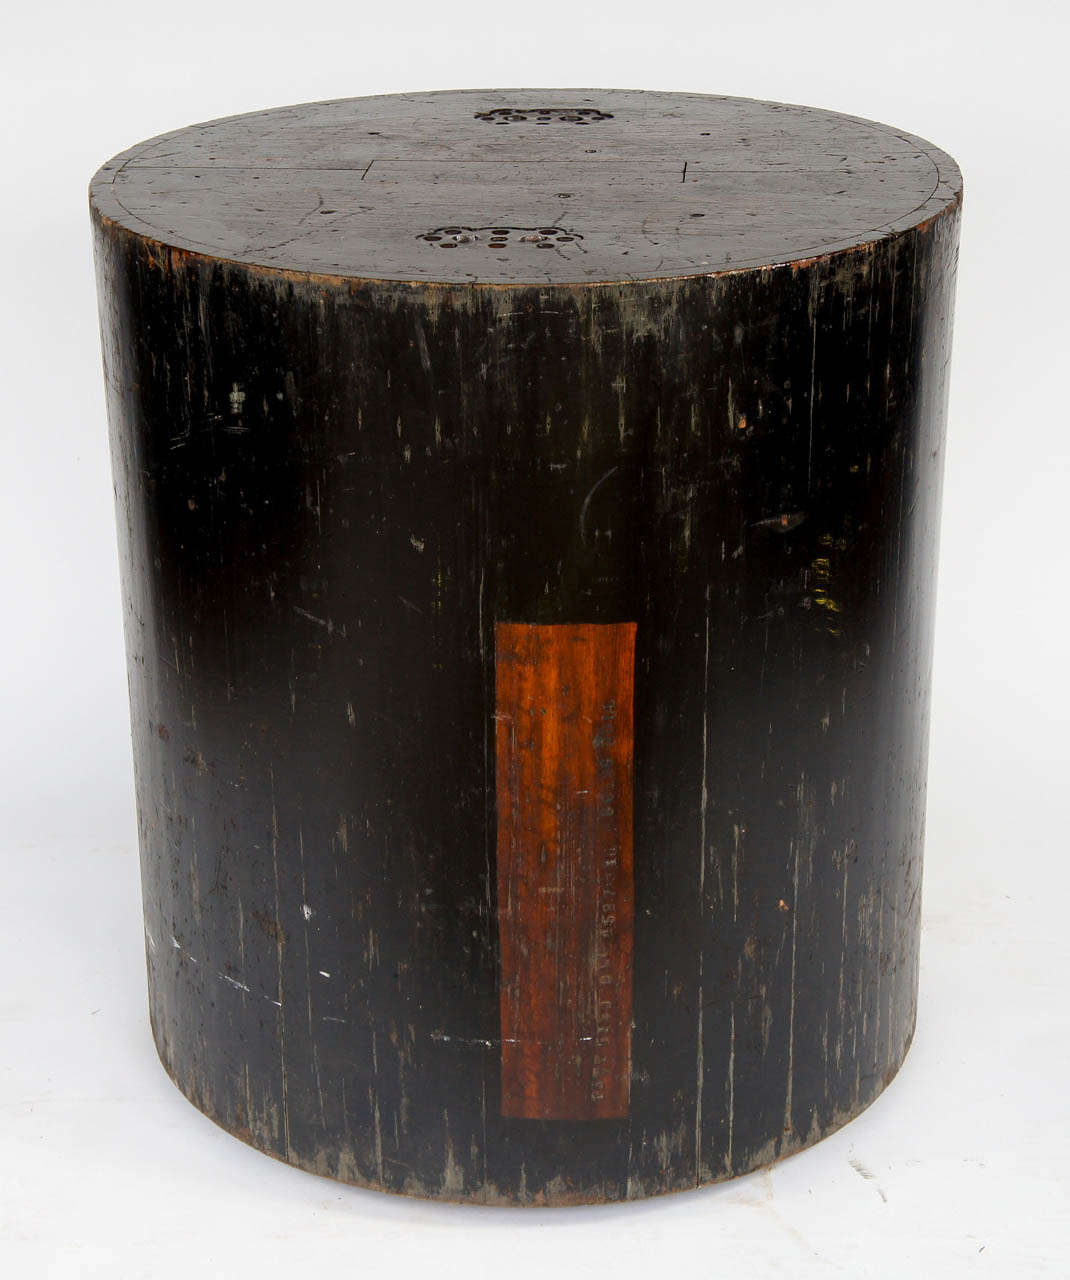 This Bold Circular Pedestal was Created Originally as a Patterrn Mold
i.e. A Mold for an Iron Industrial Object.
The Form is Great and Useful as a Pedestal for Display
Questions as to it's Origin gladly Welcomed